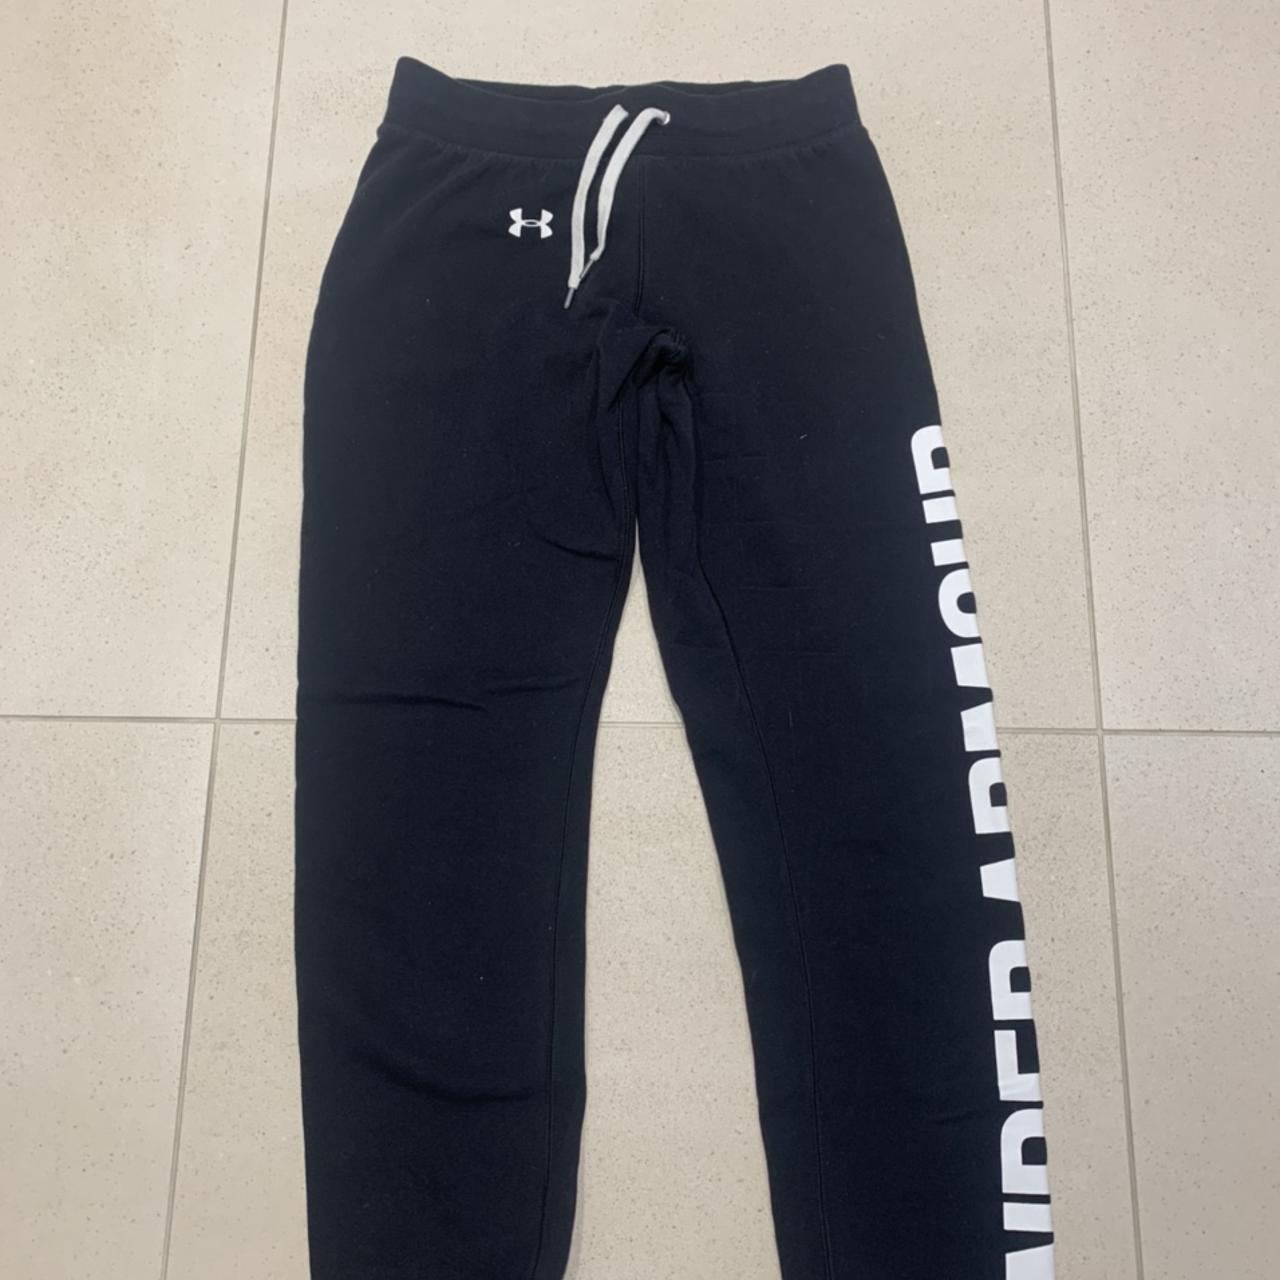 under armour women's joggers size XS - black with - Depop